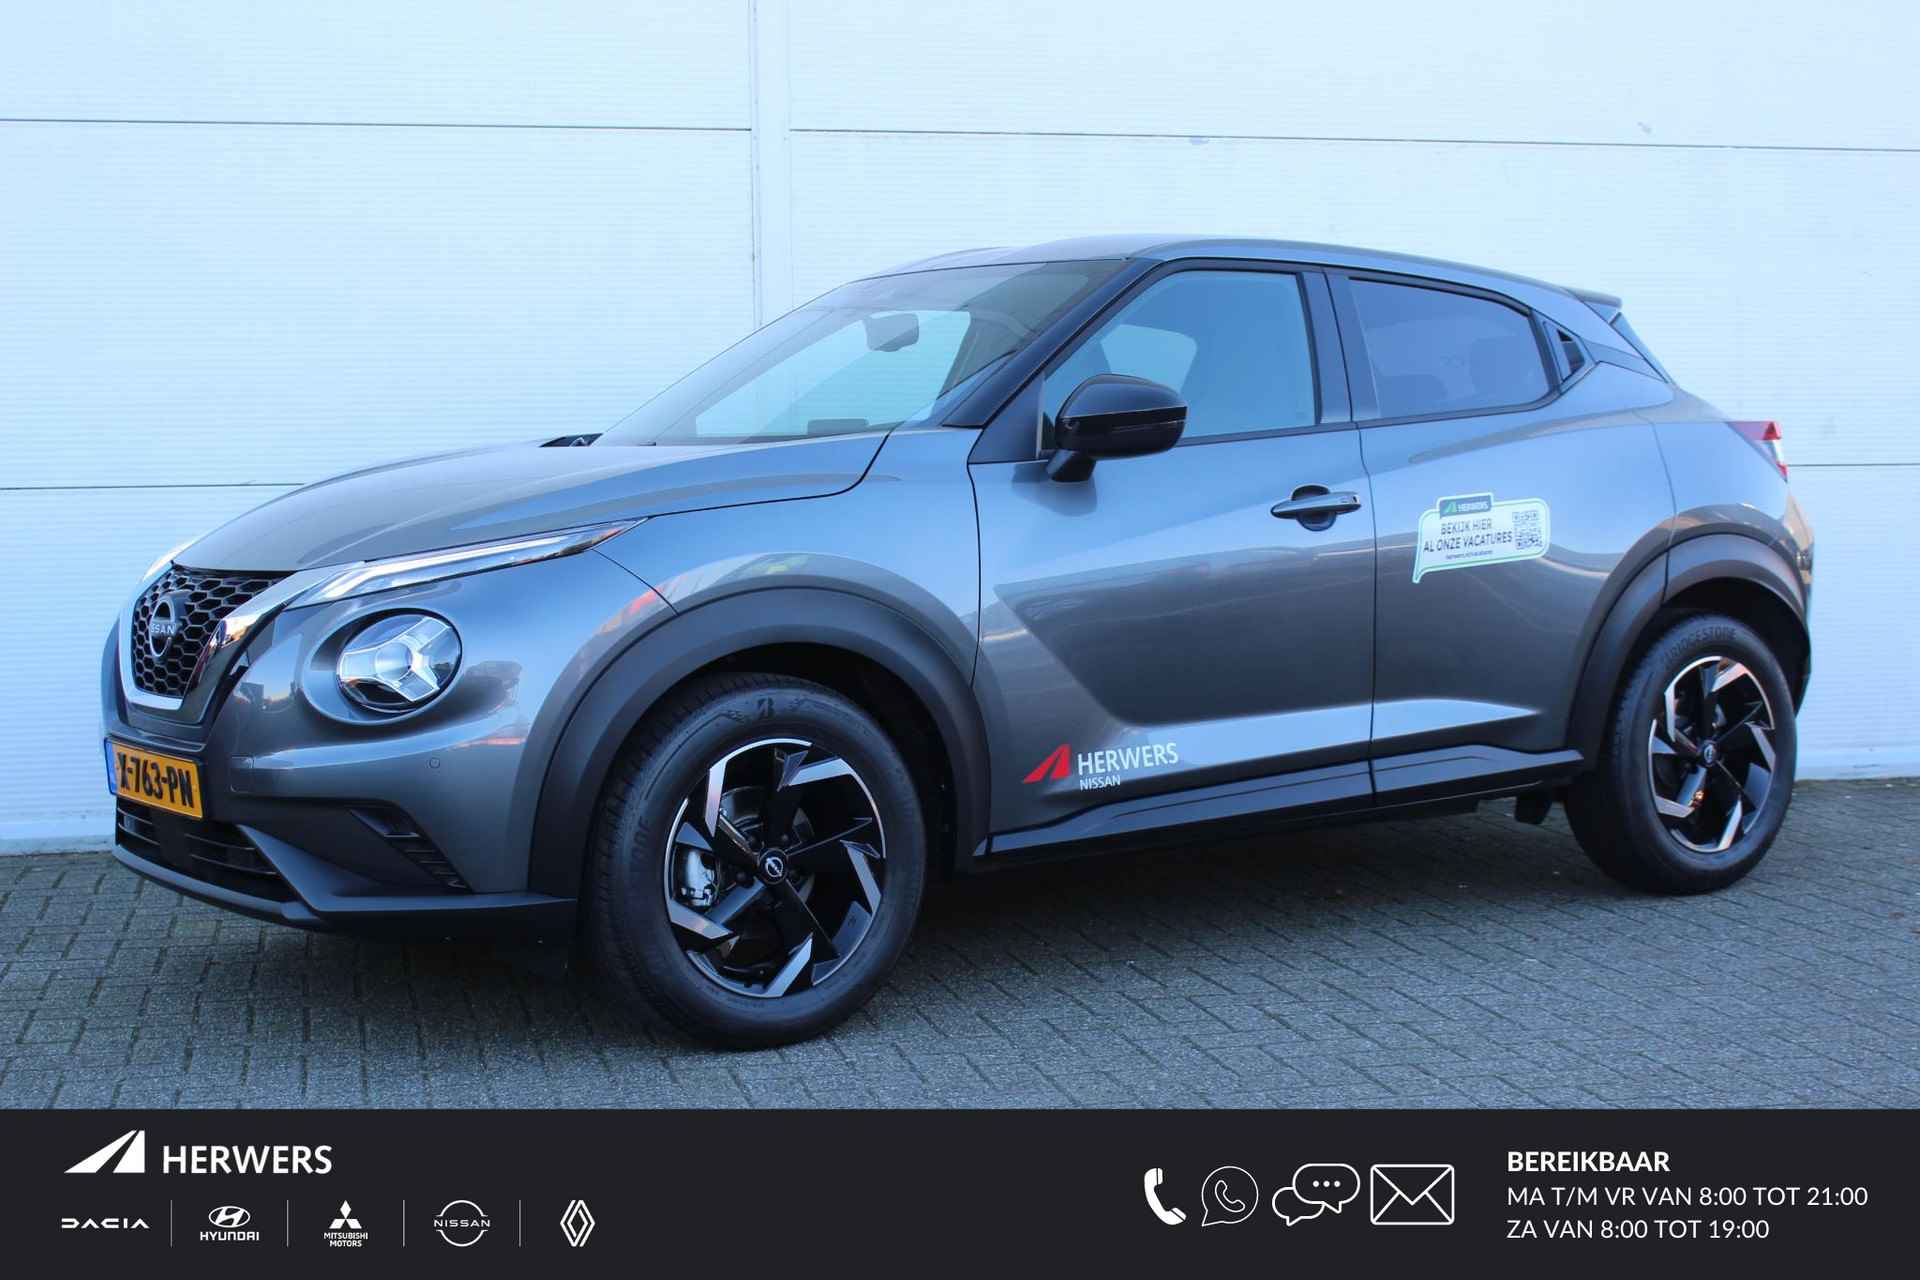 Nissan Juke 1.0 DIG-T 114 N-Connecta / Apple Carplay/Android Auto / Climate Control / Cruise Control / Achteruitrijcamera / Keyless Entry & Start / - 1/39